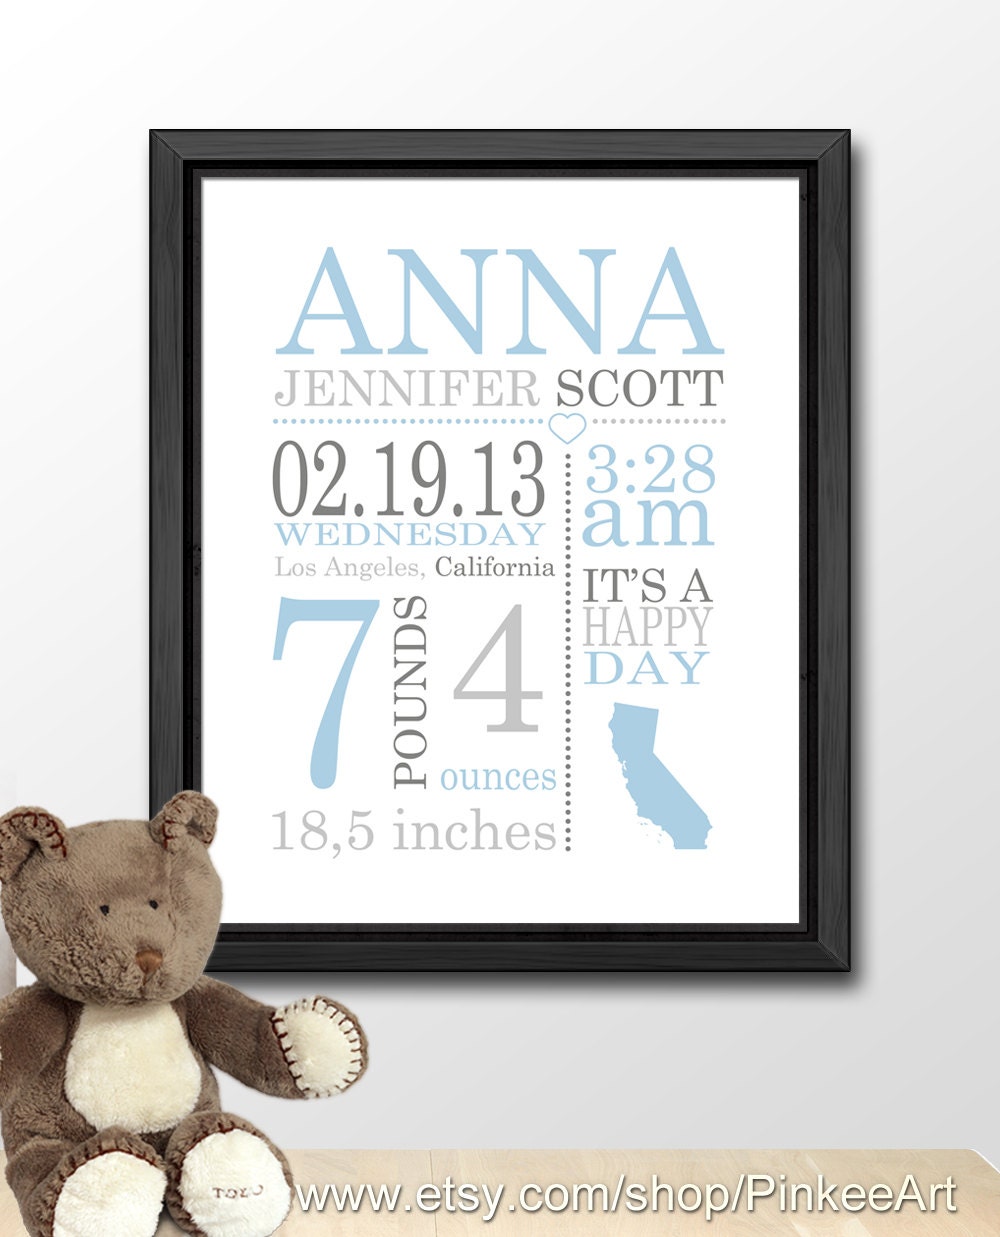 Popular items for baby wall decor on Etsy